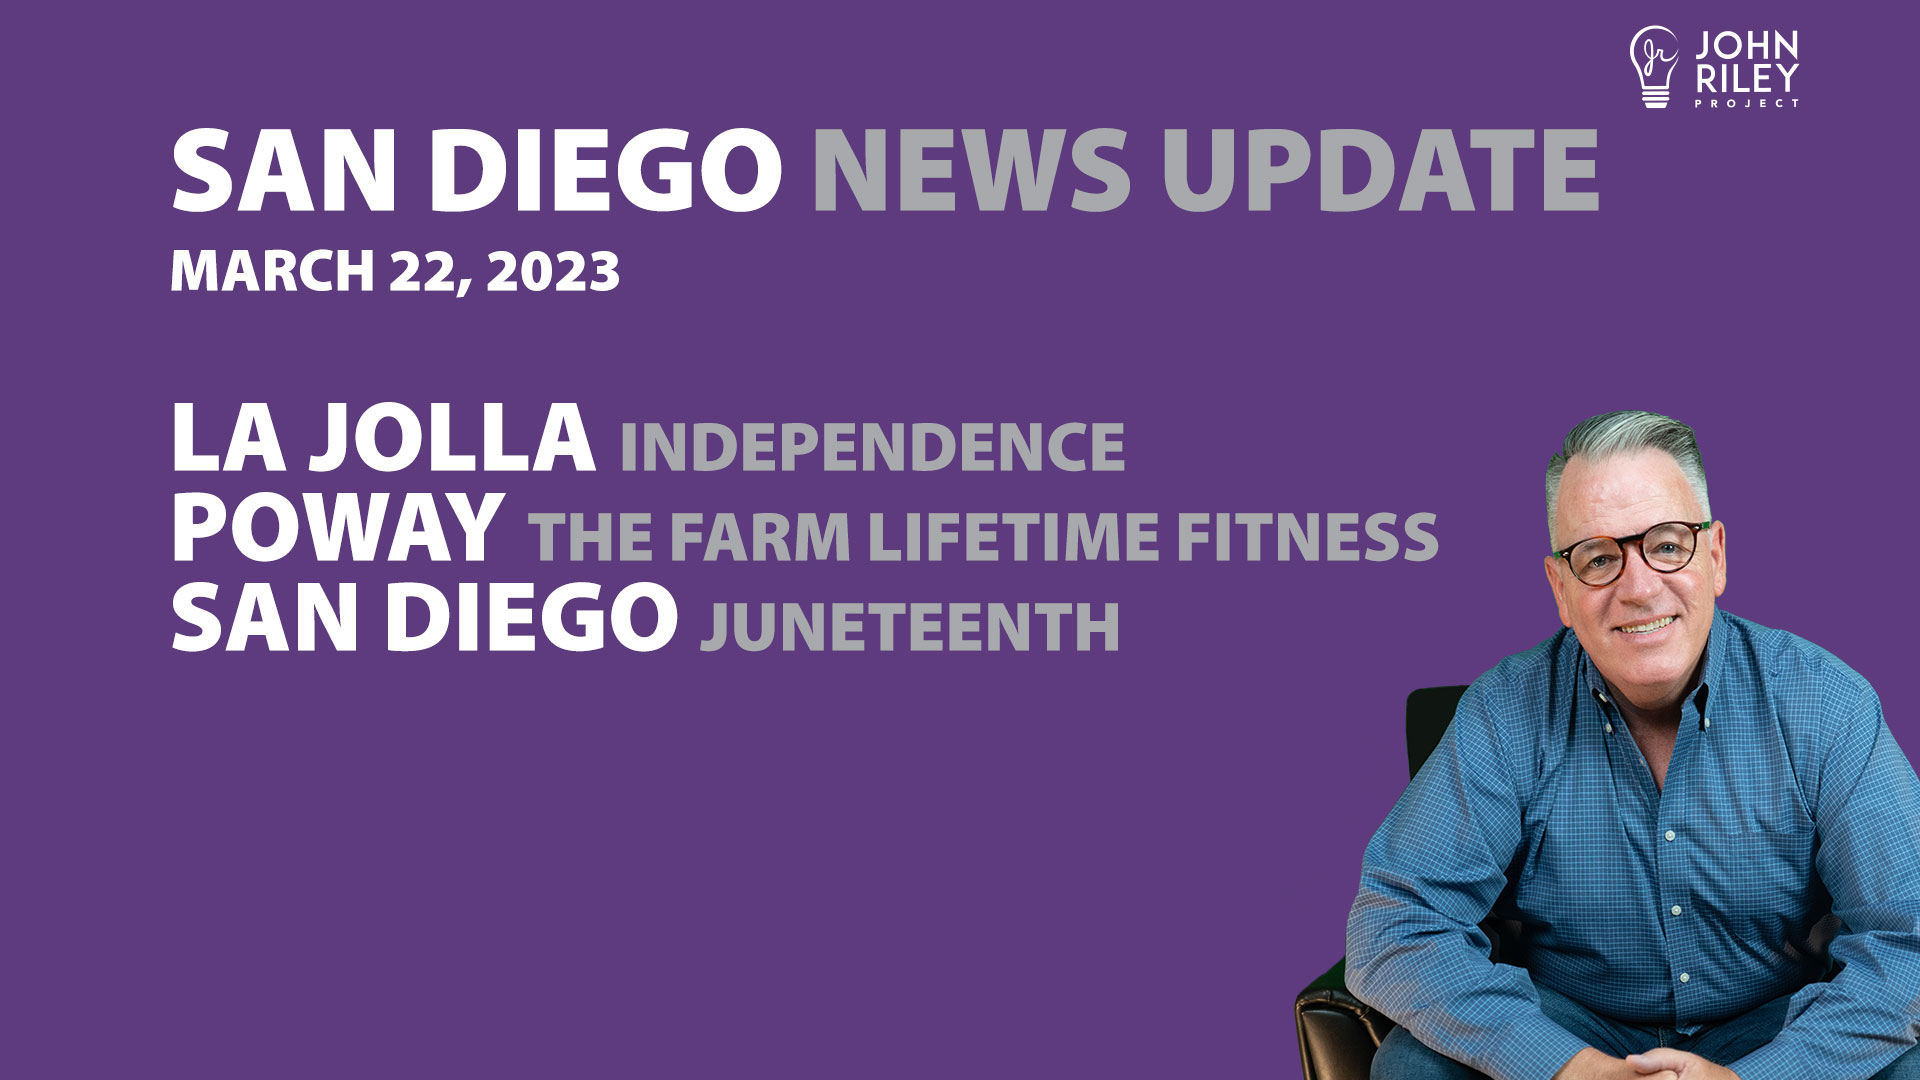 John Riley discusses La Jolla is demanding independence! Will San Diego agree to a divorce? We also discuss the Life Time Fitness project in Poway, and Juneteenth in San Diego.